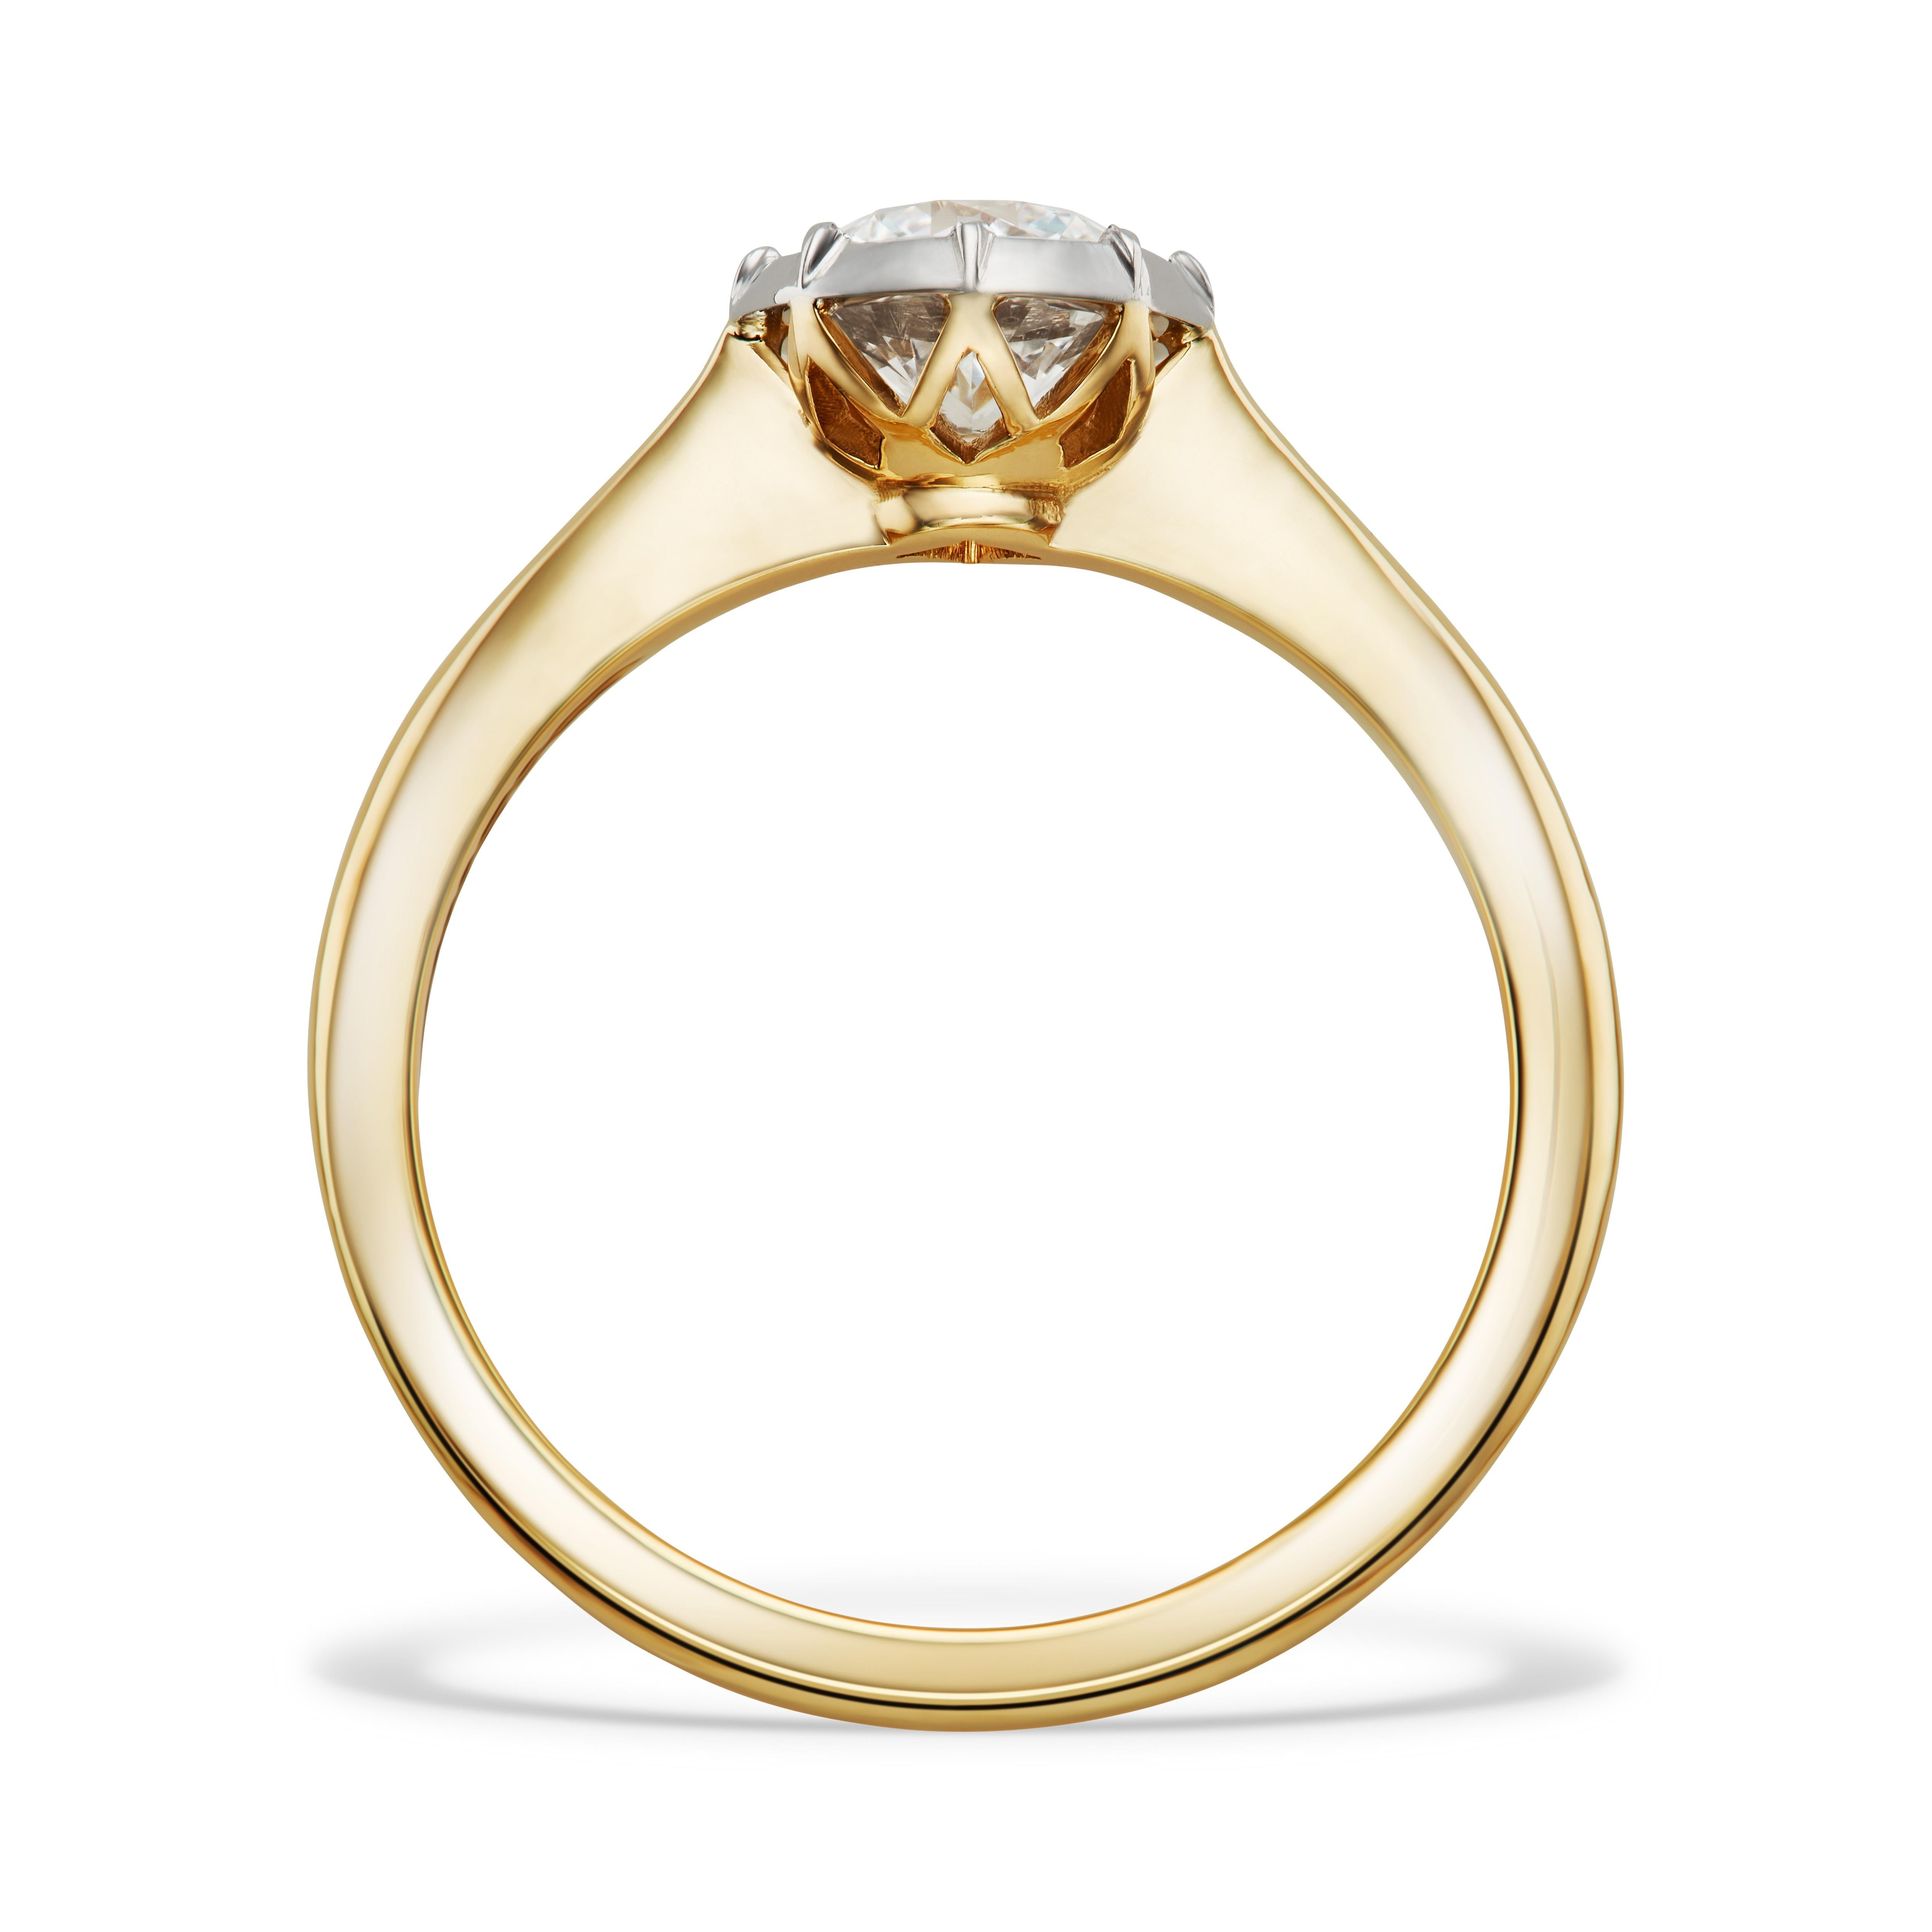 With a stunning round old cut diamond traditionally set by hand in a 